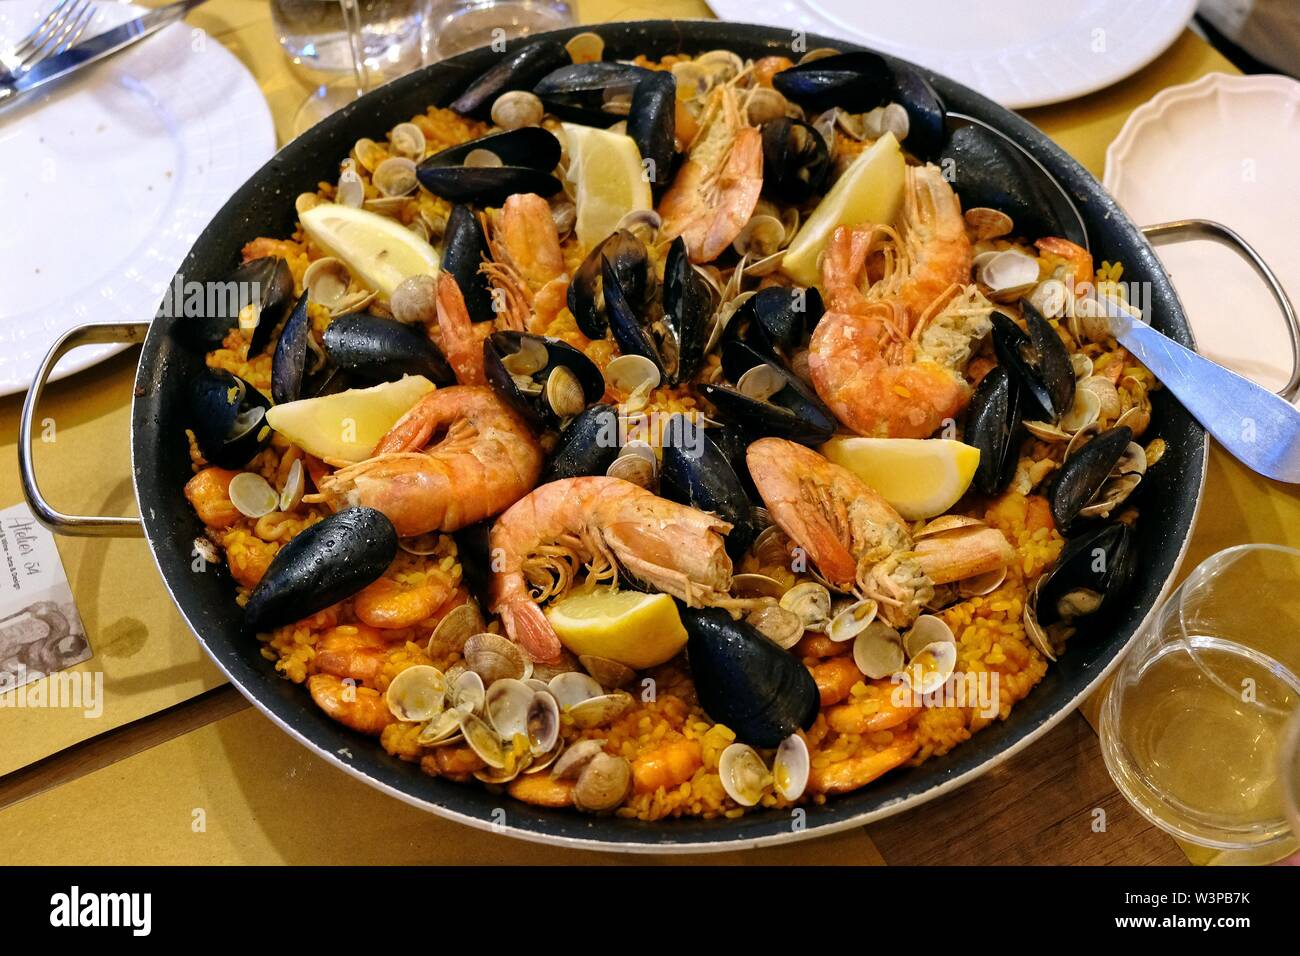 Paella pan with seafood in a restaurant, coastal town of Fano, Marche region, Italy Stock Photo